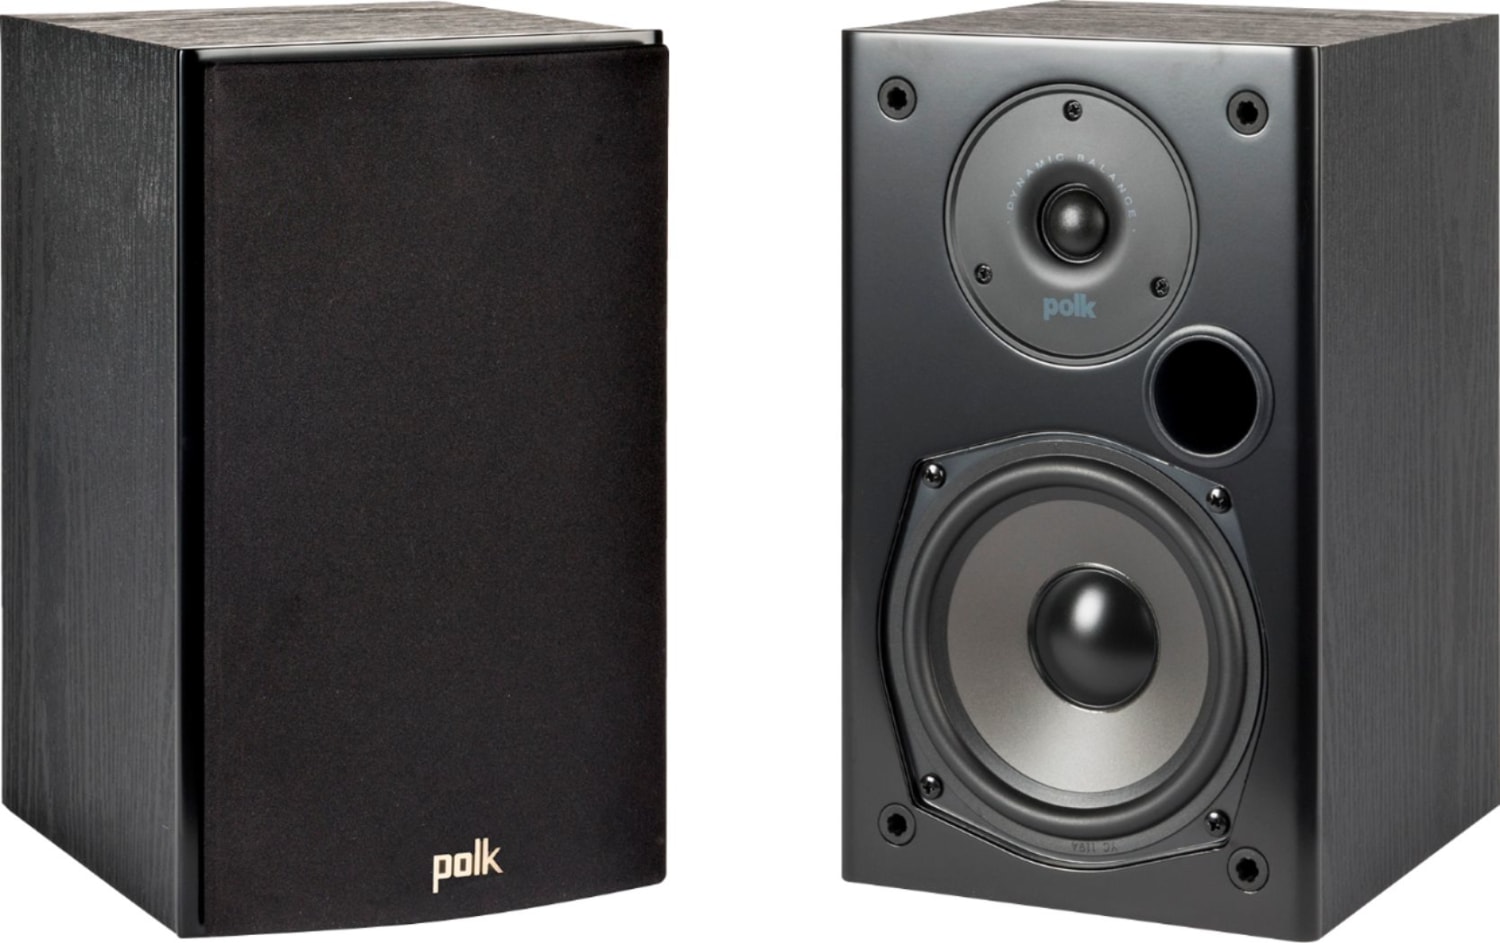 The Best Bookshelf Speakers For Home Audio According To Experts